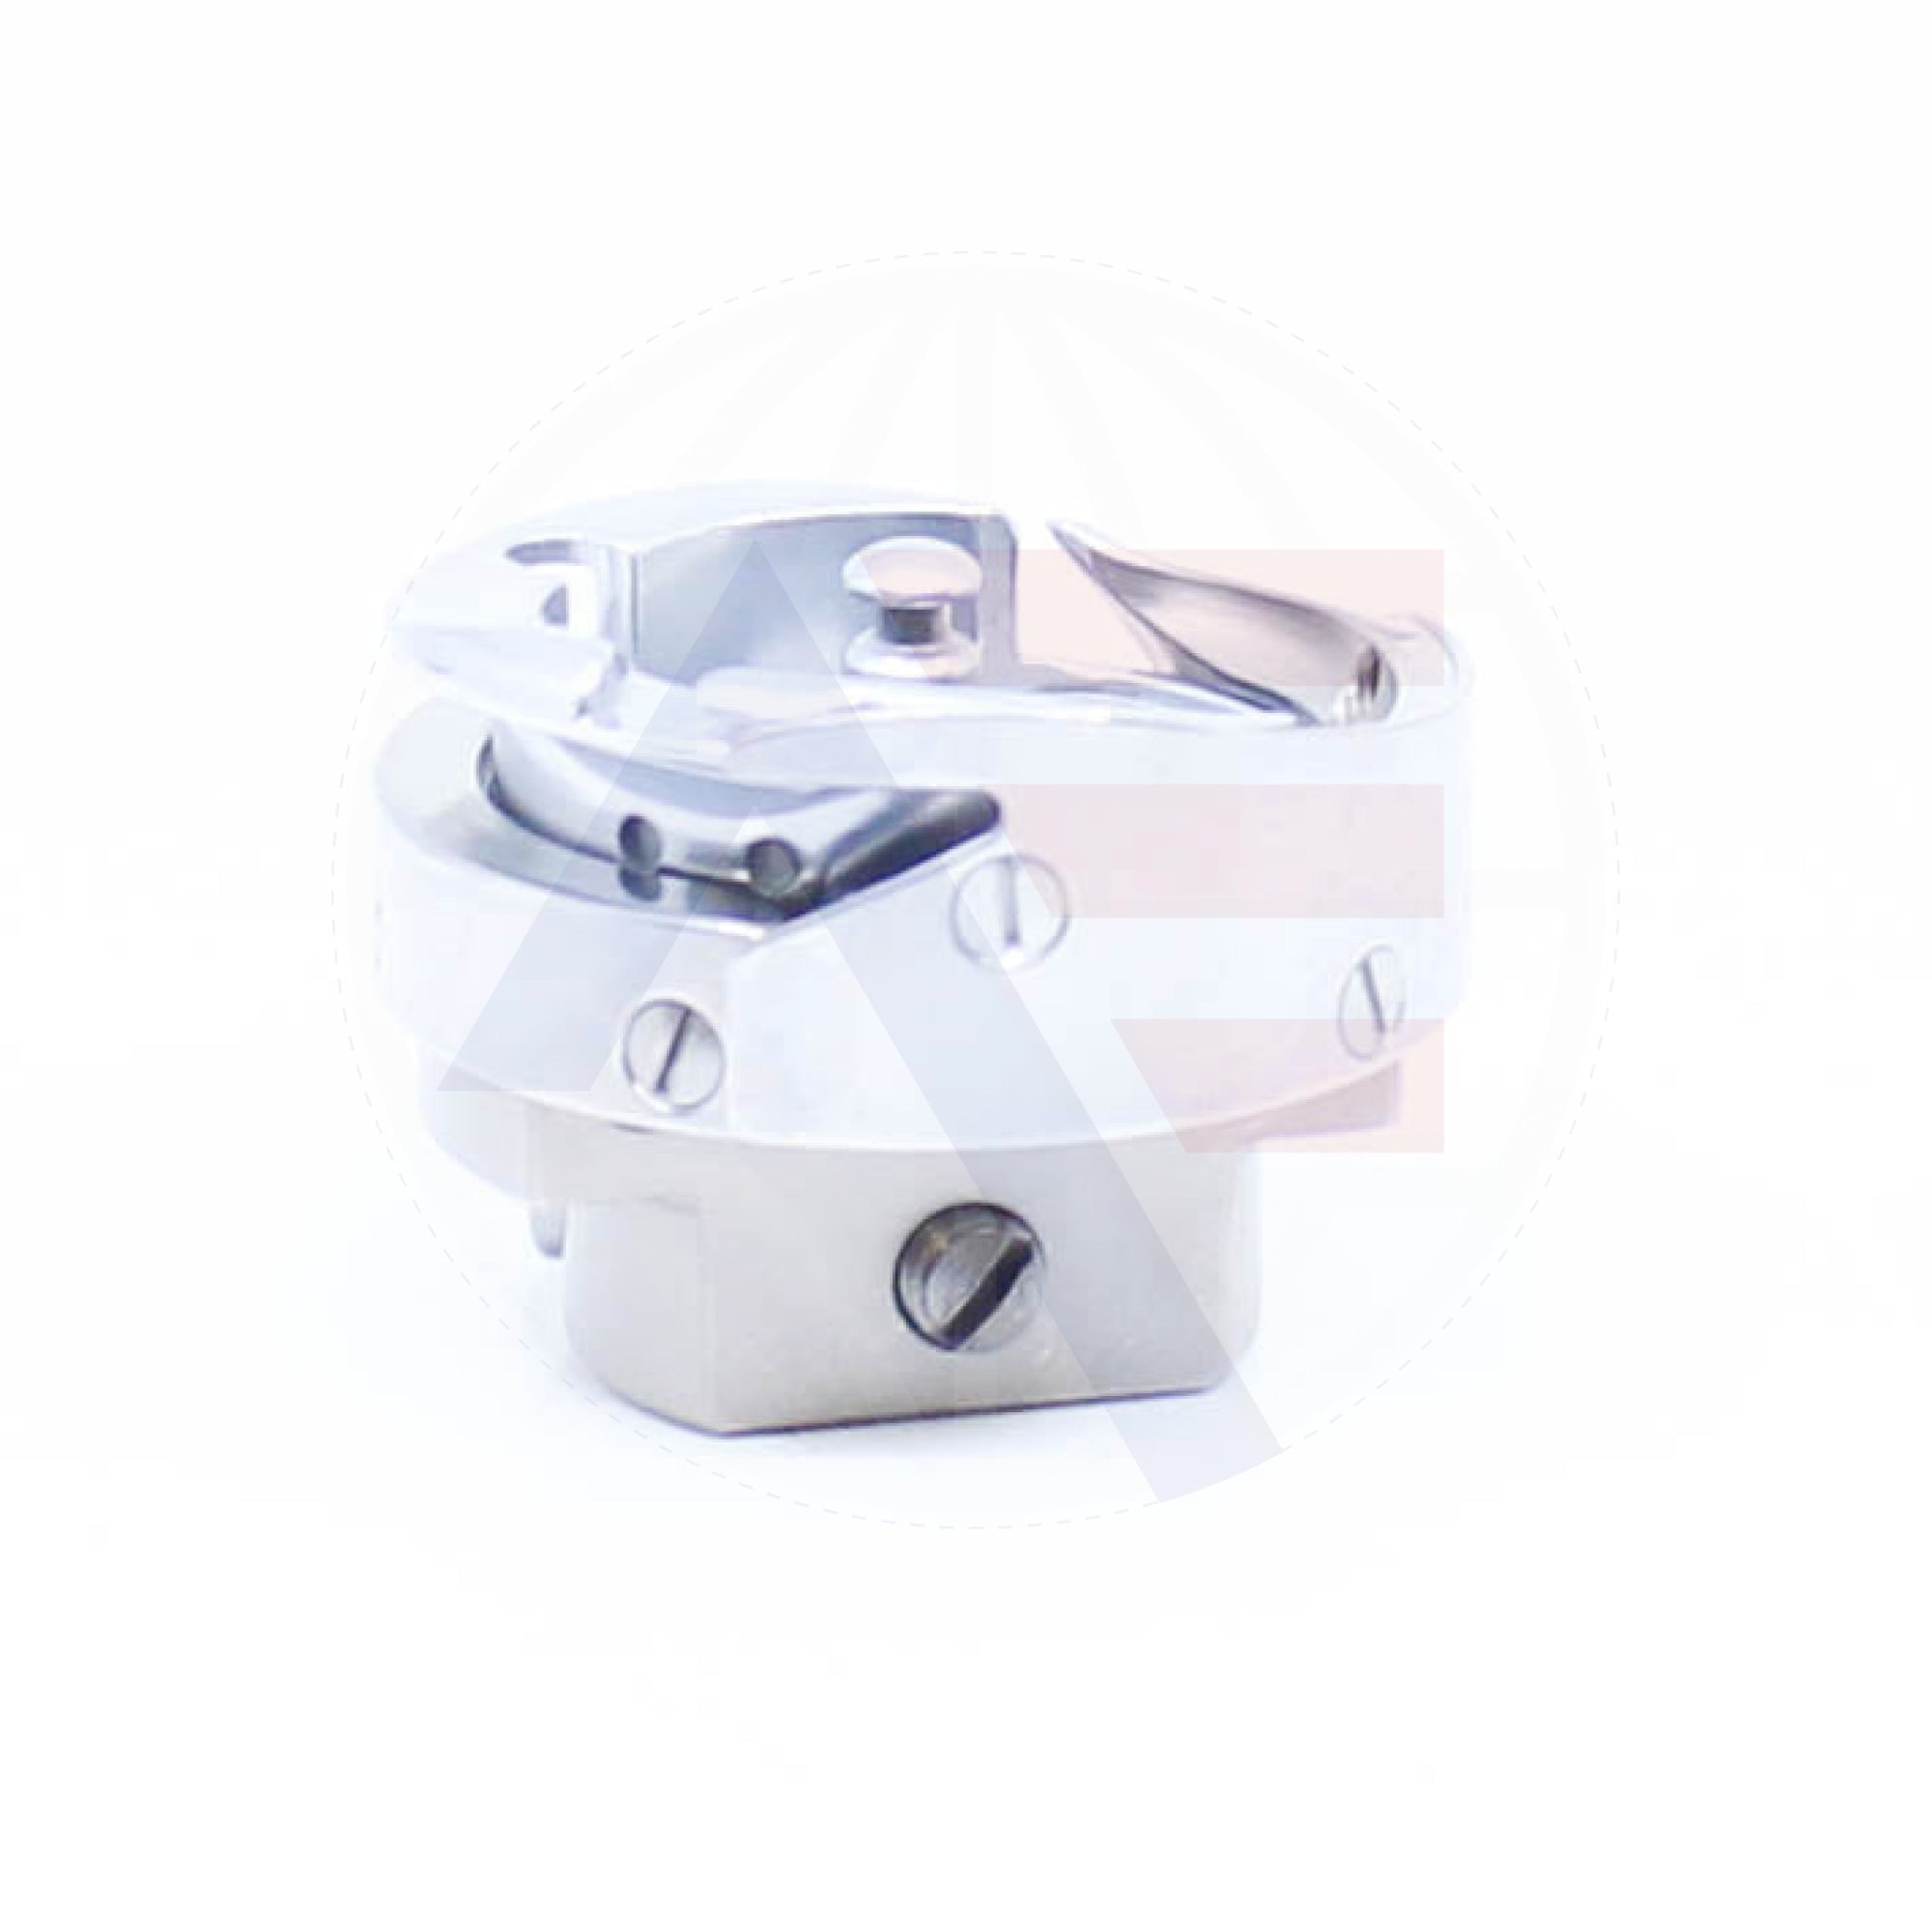 Hsh794 Btr Hook And Base Sewing Machine Spare Parts